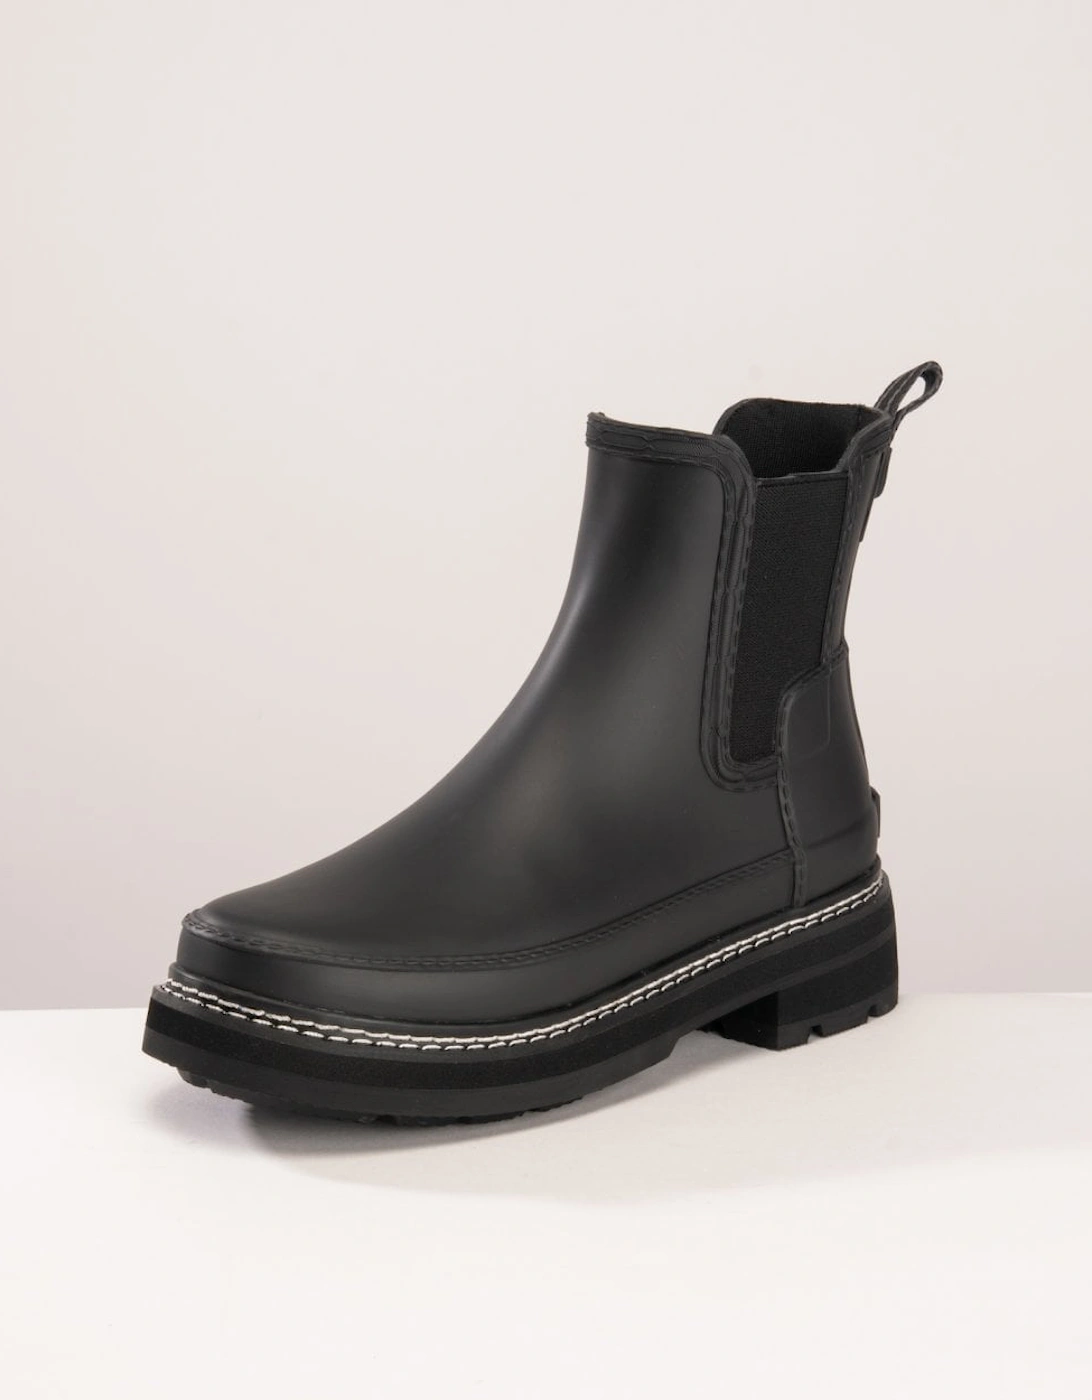 Refined Stitch Detail Chelsea Boots